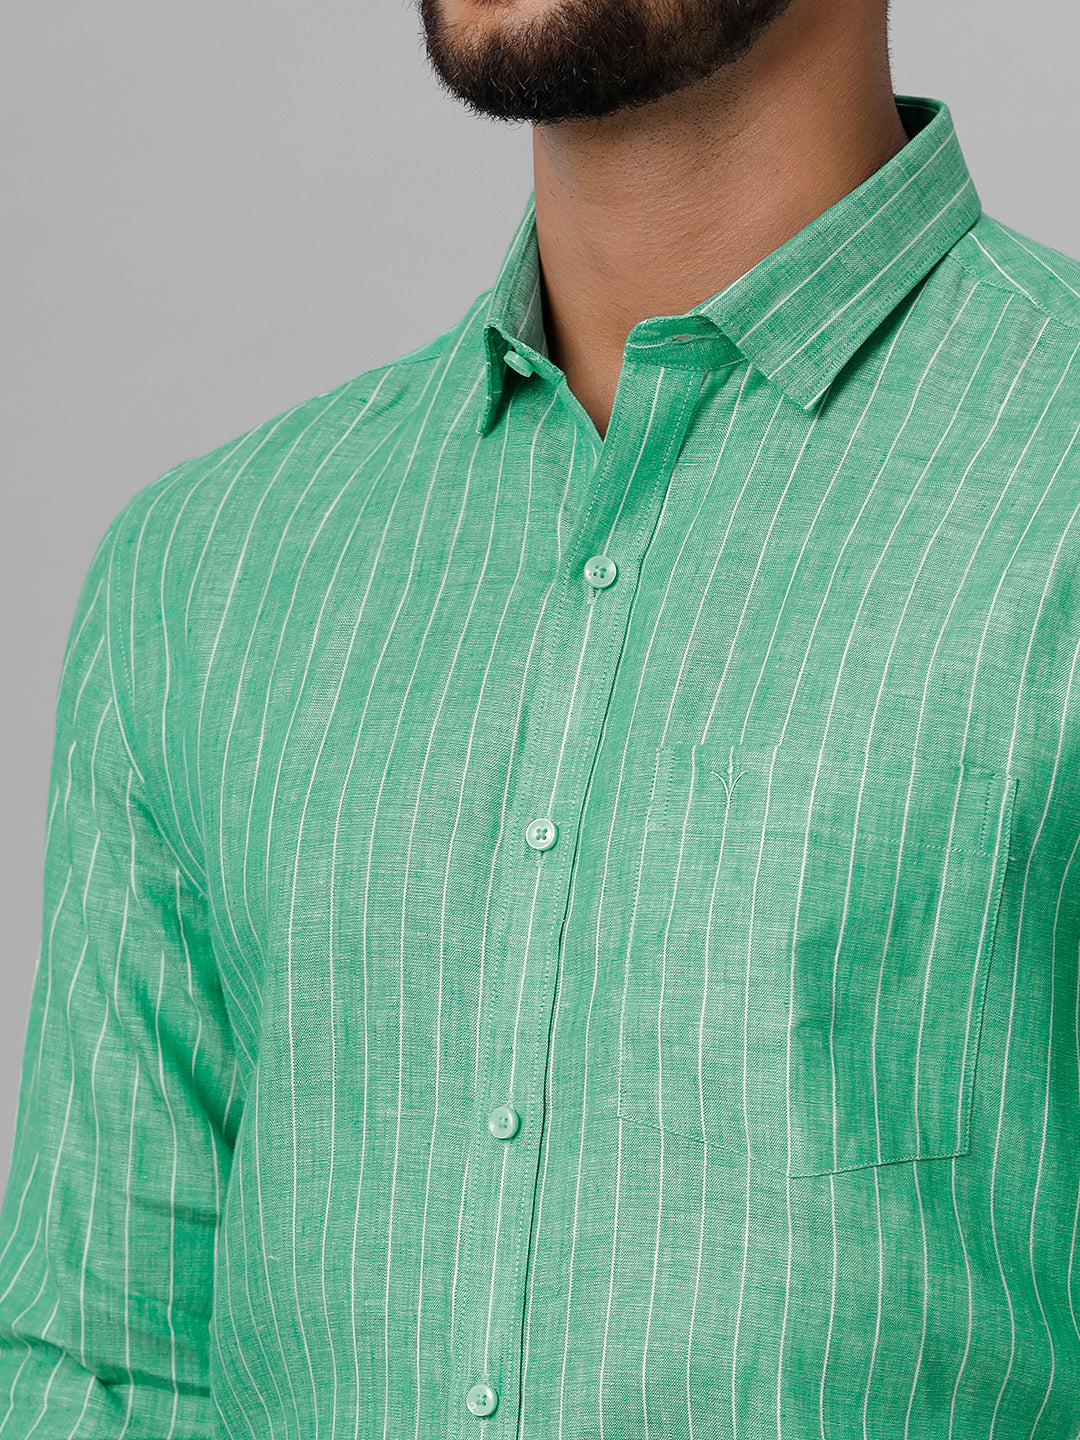 Mens Pure Linen Striped Full Sleeves Green Shirt LS12-Zoom view